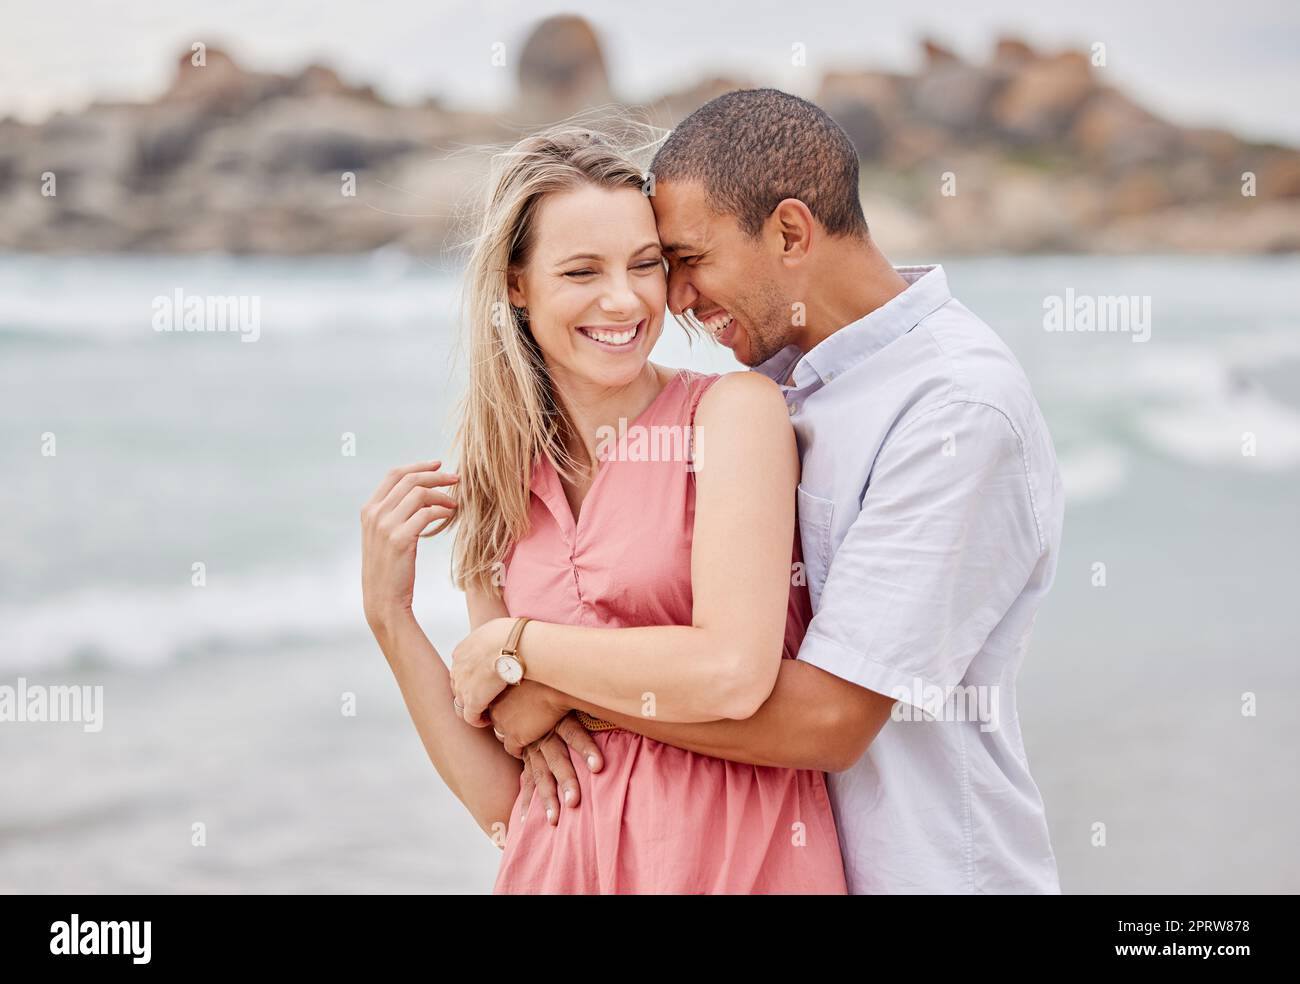 Travel, beach and couple hug, happy and laughing while bonding outdoors, enjoying the view of the ocean. Love, relationship and water fun with relax man and woman on seaside trip in San francisco Stock Photo